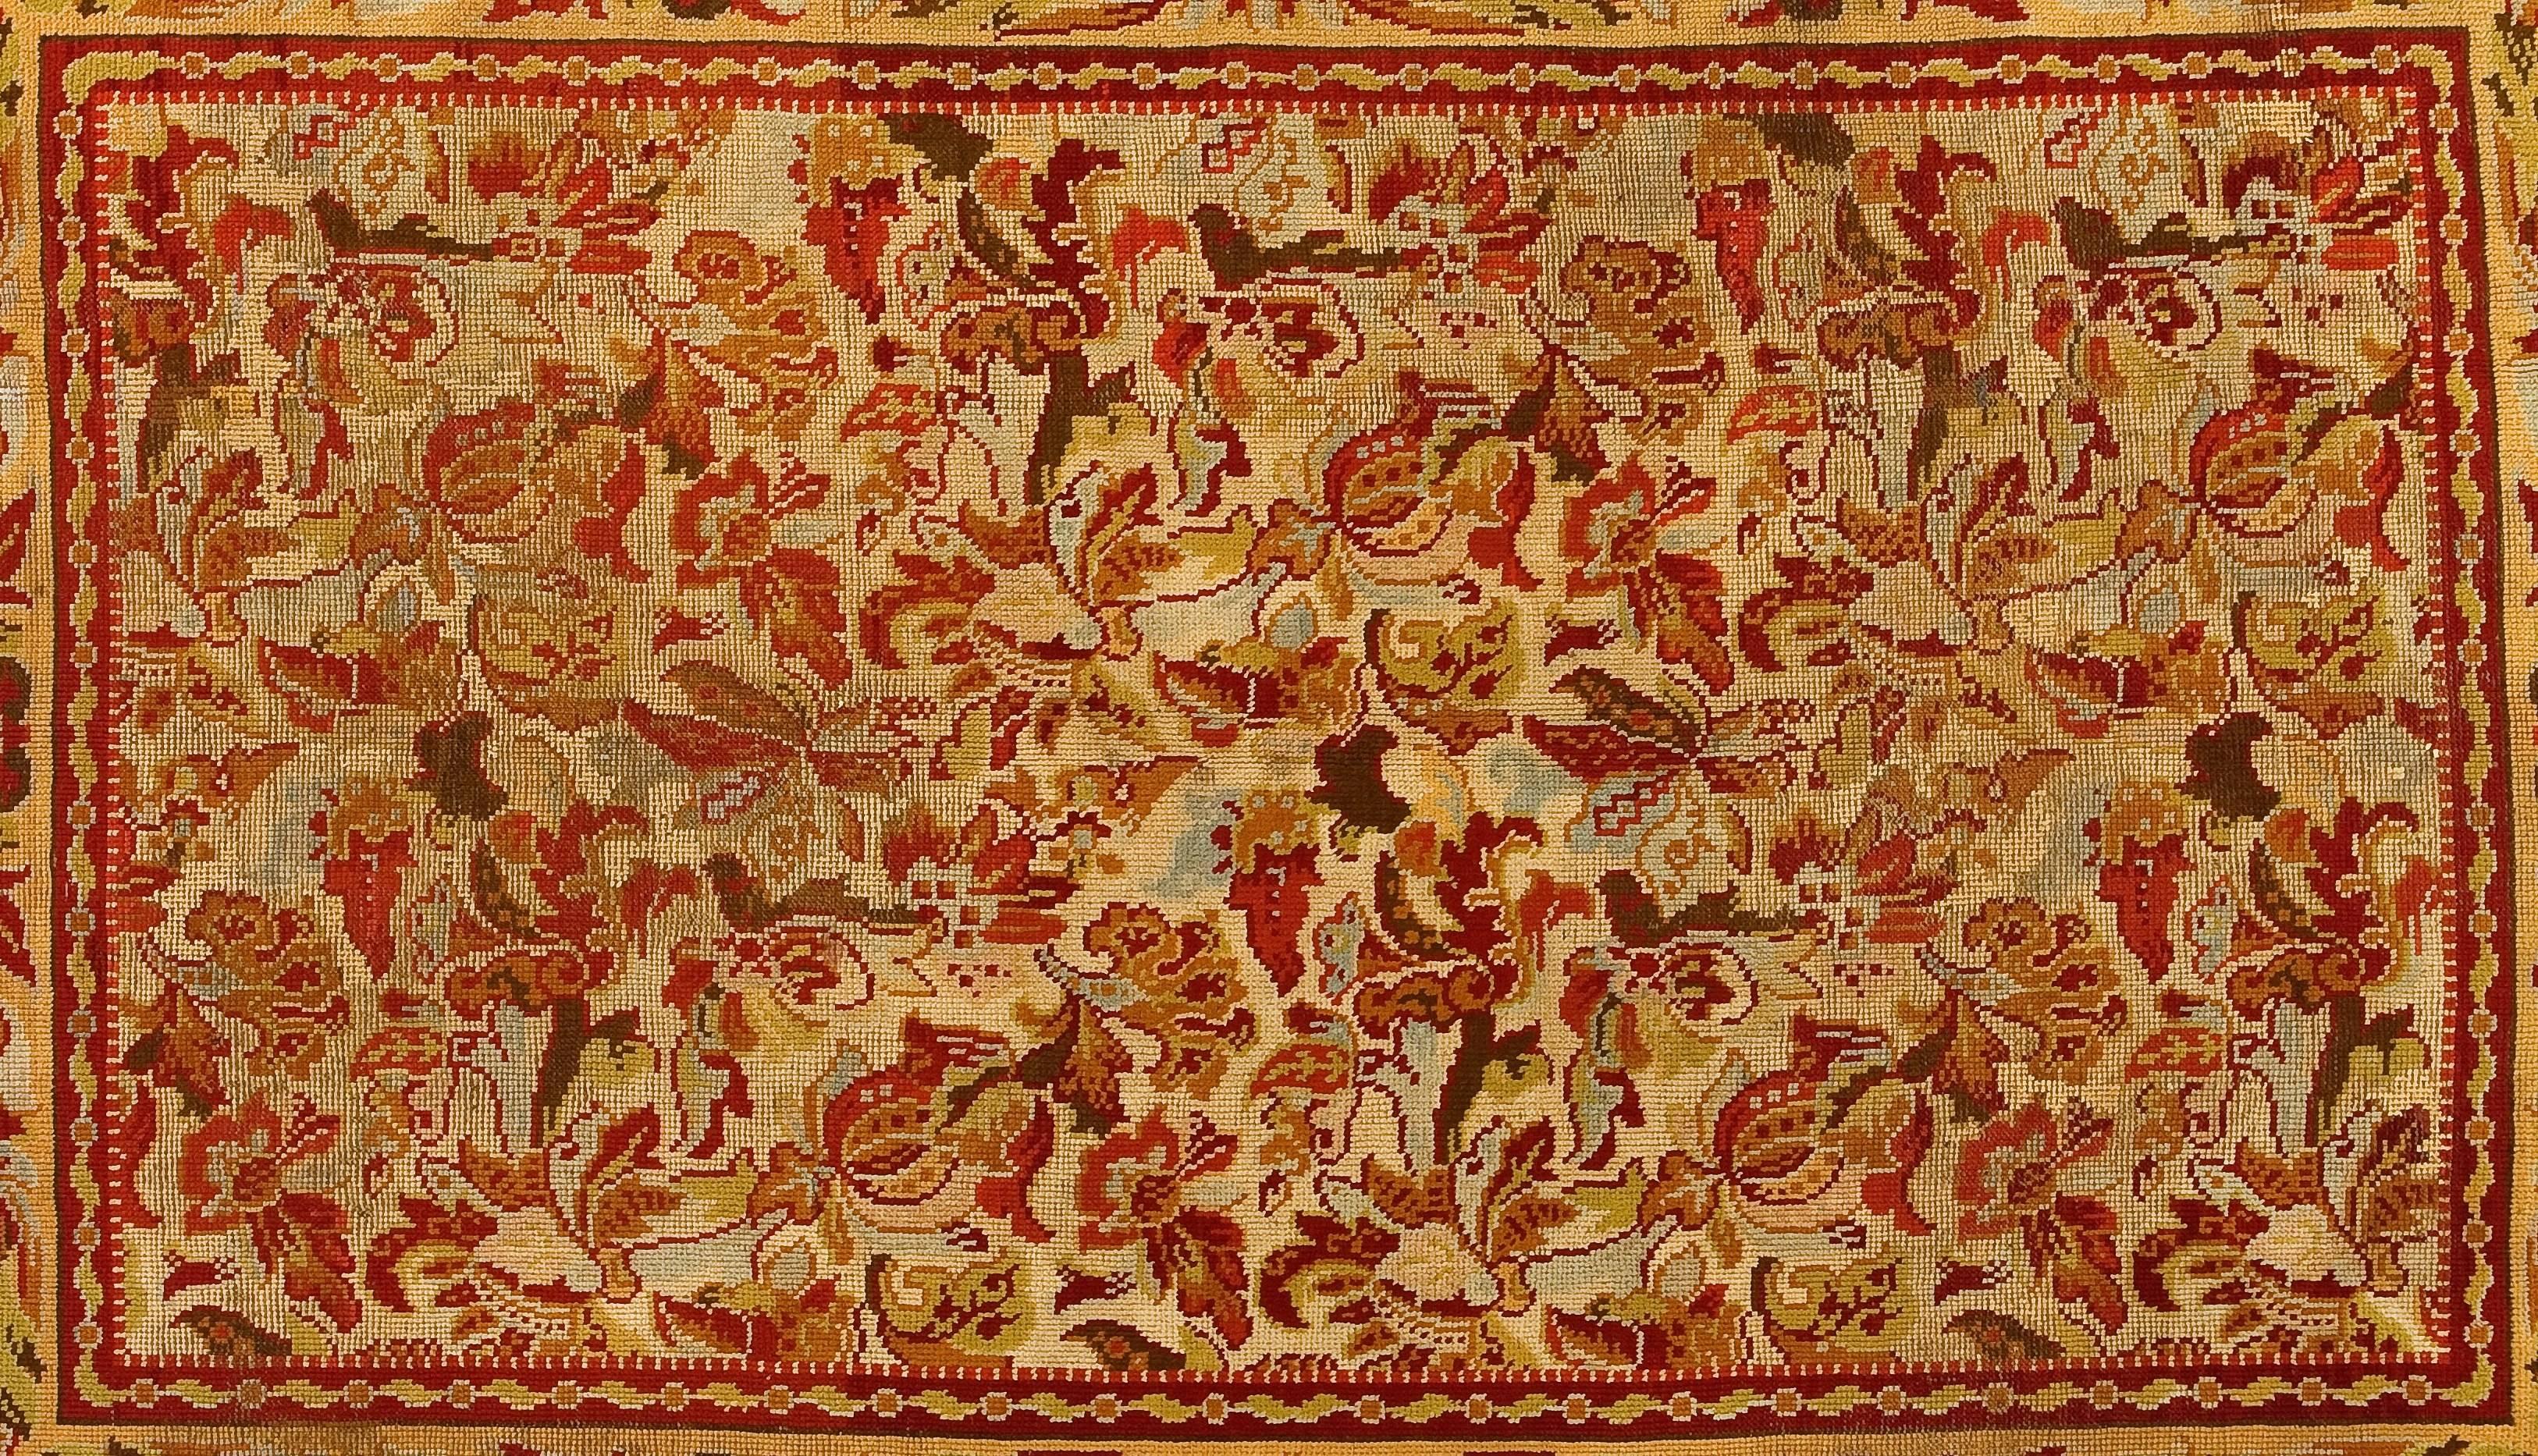 This Portuguese Ancien piece has at least 70 years old and represent some of the very finest examples of art from the time and place from which they originate. The complex methods and high-quality ingredients employed by the master rug makers